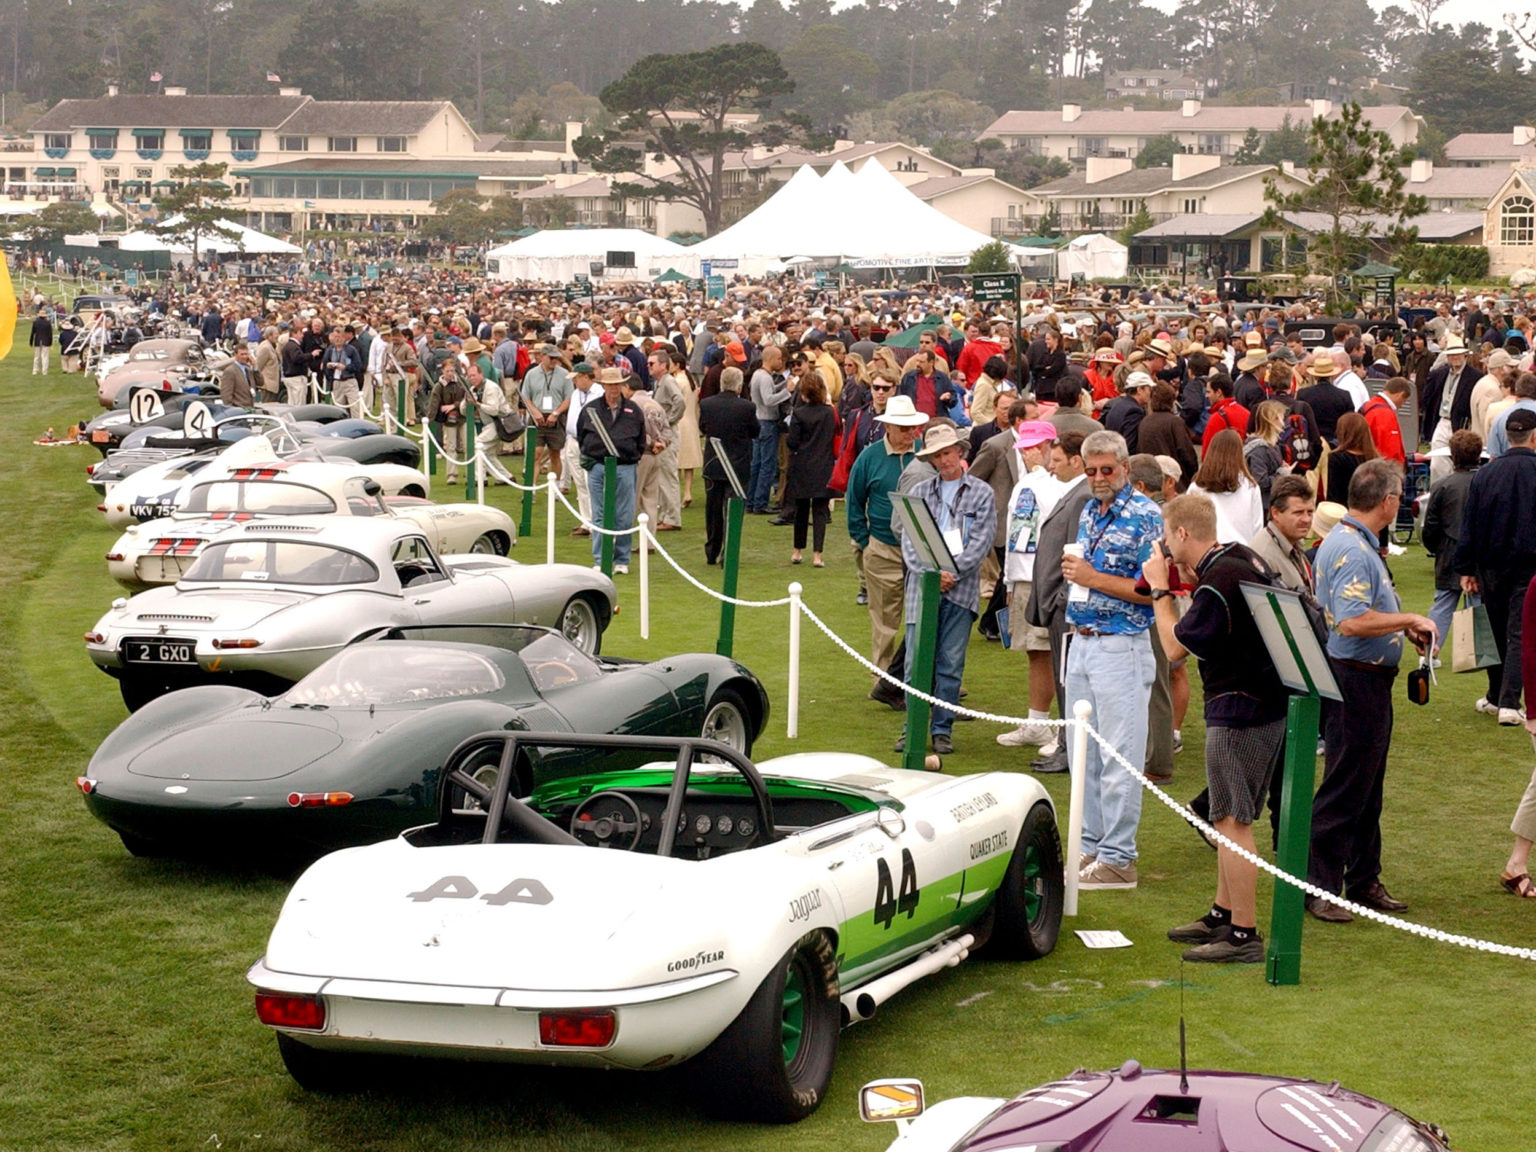 The Pebble Beach Concours d'Elegance attracts thousands of visitors each year.